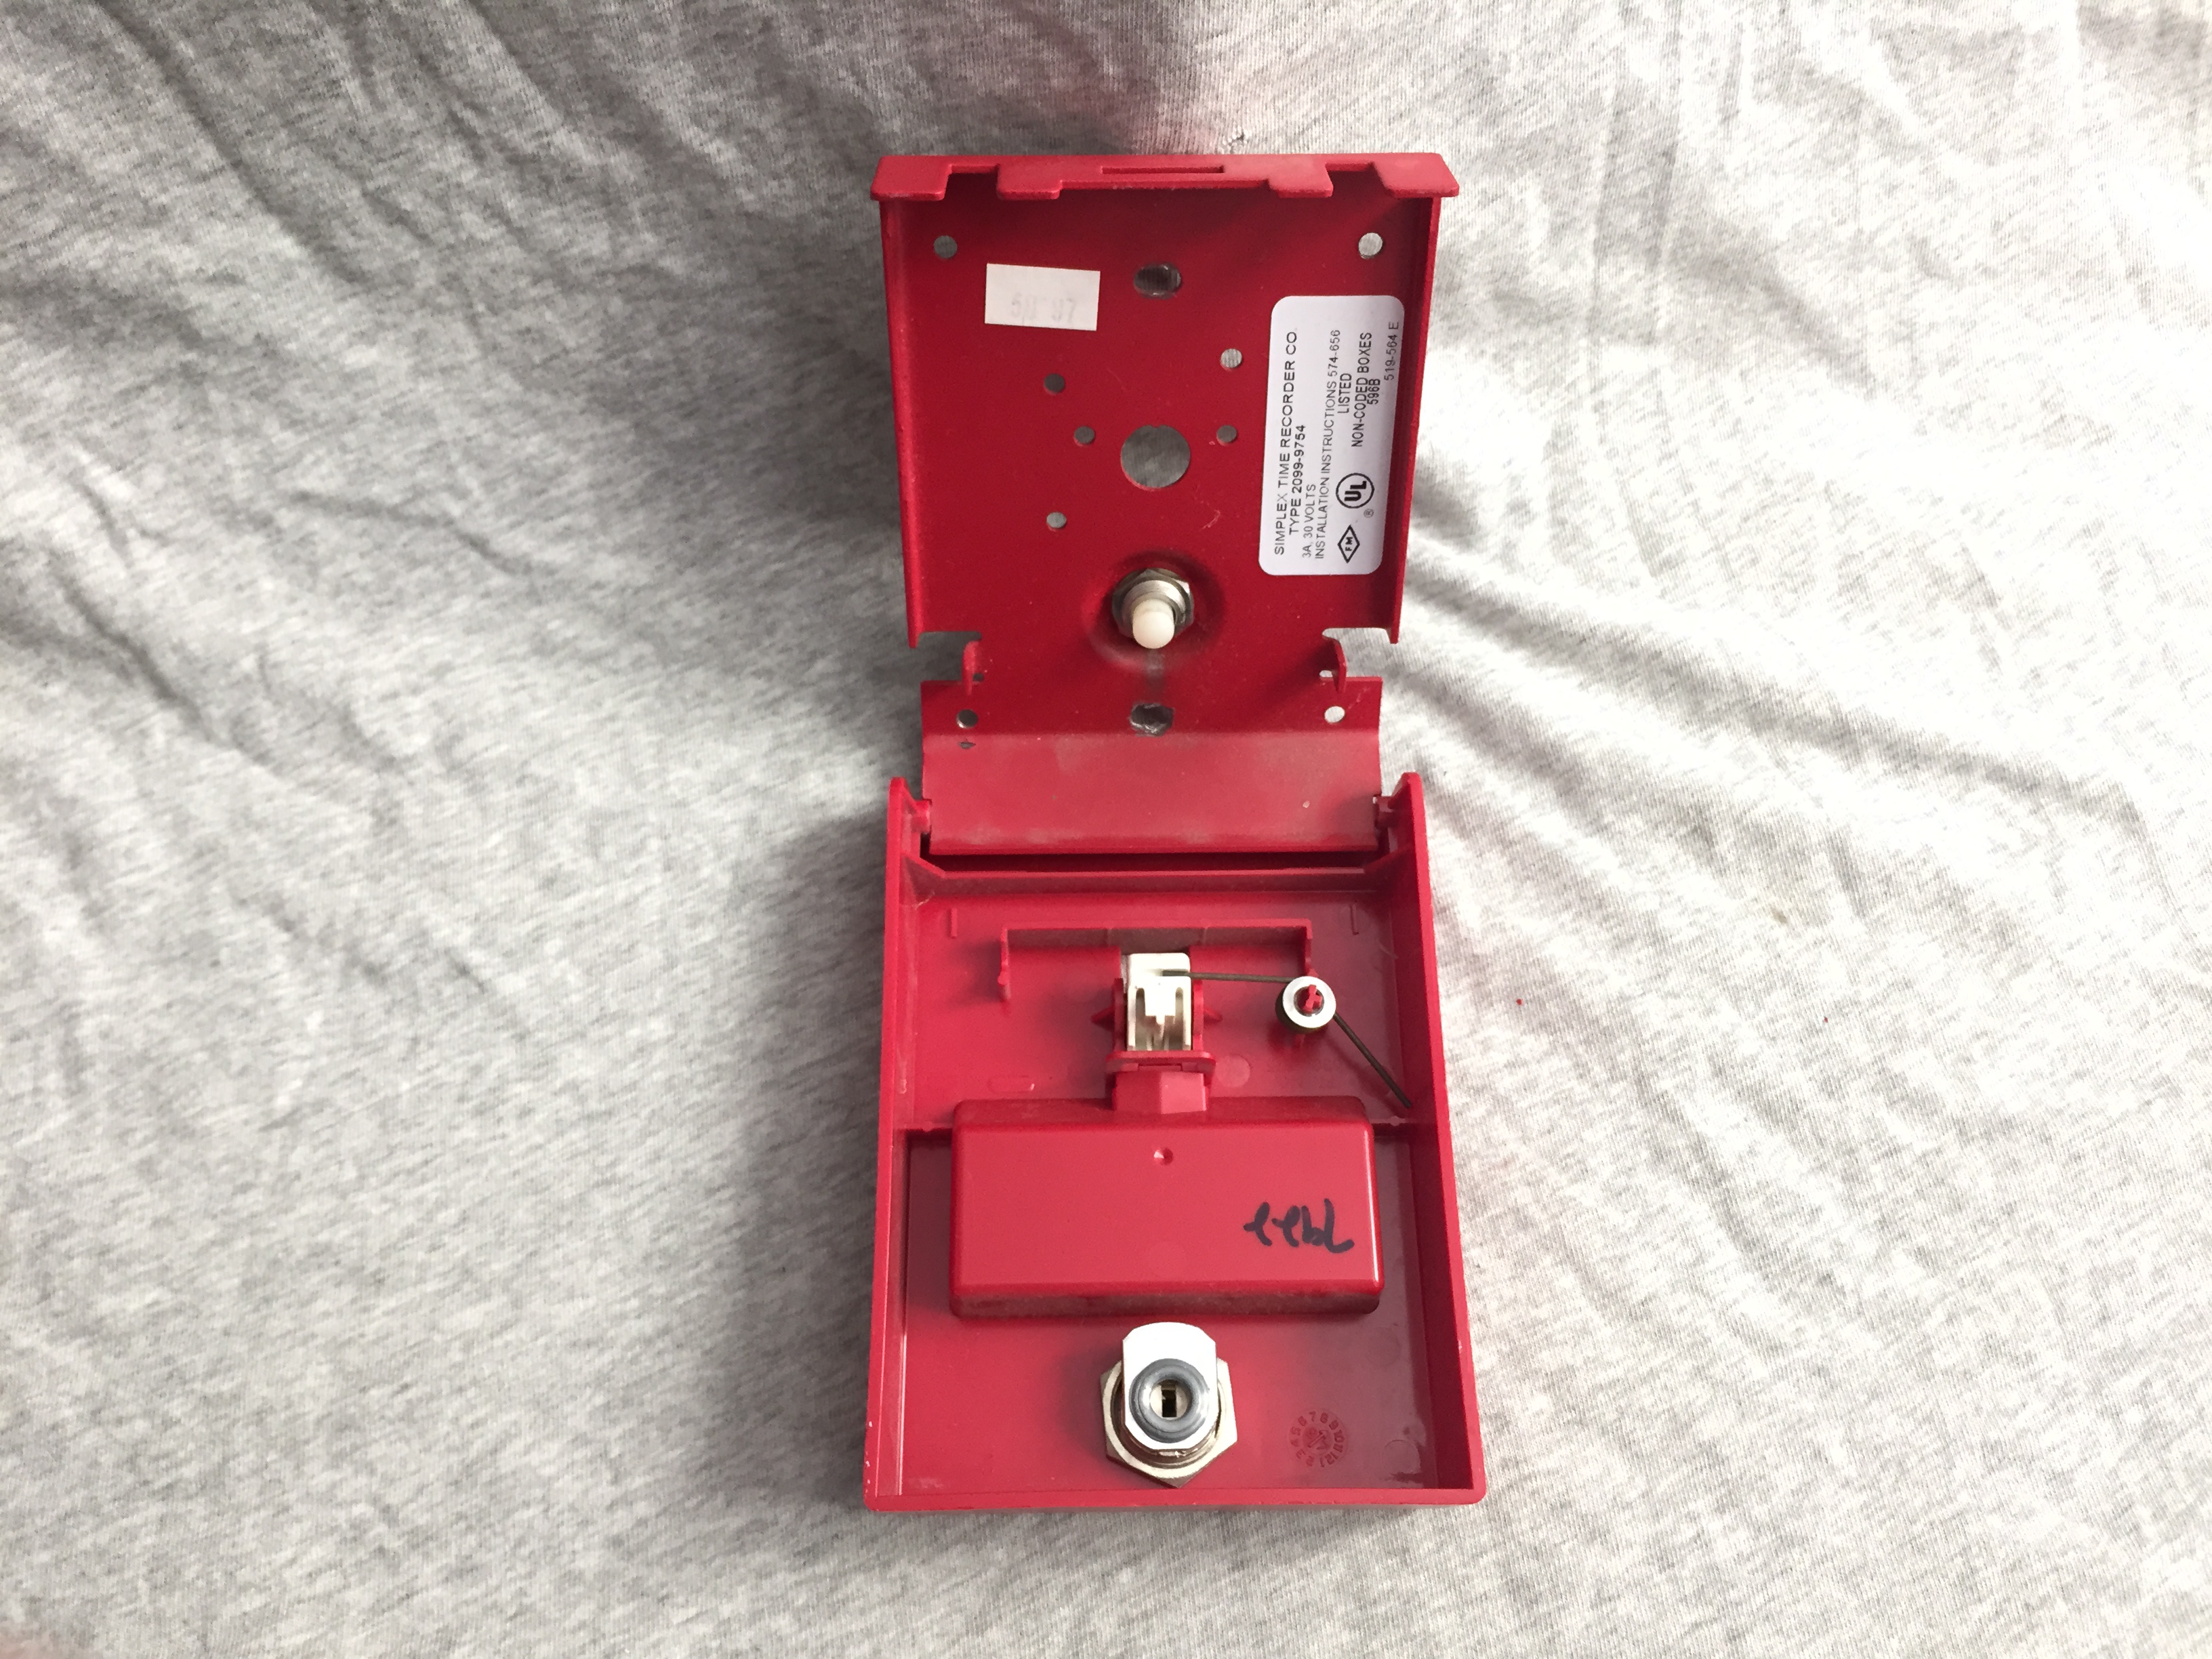 Simplex 2099-9754 - Fire Alarm Collection, Information, Pictures, and ...